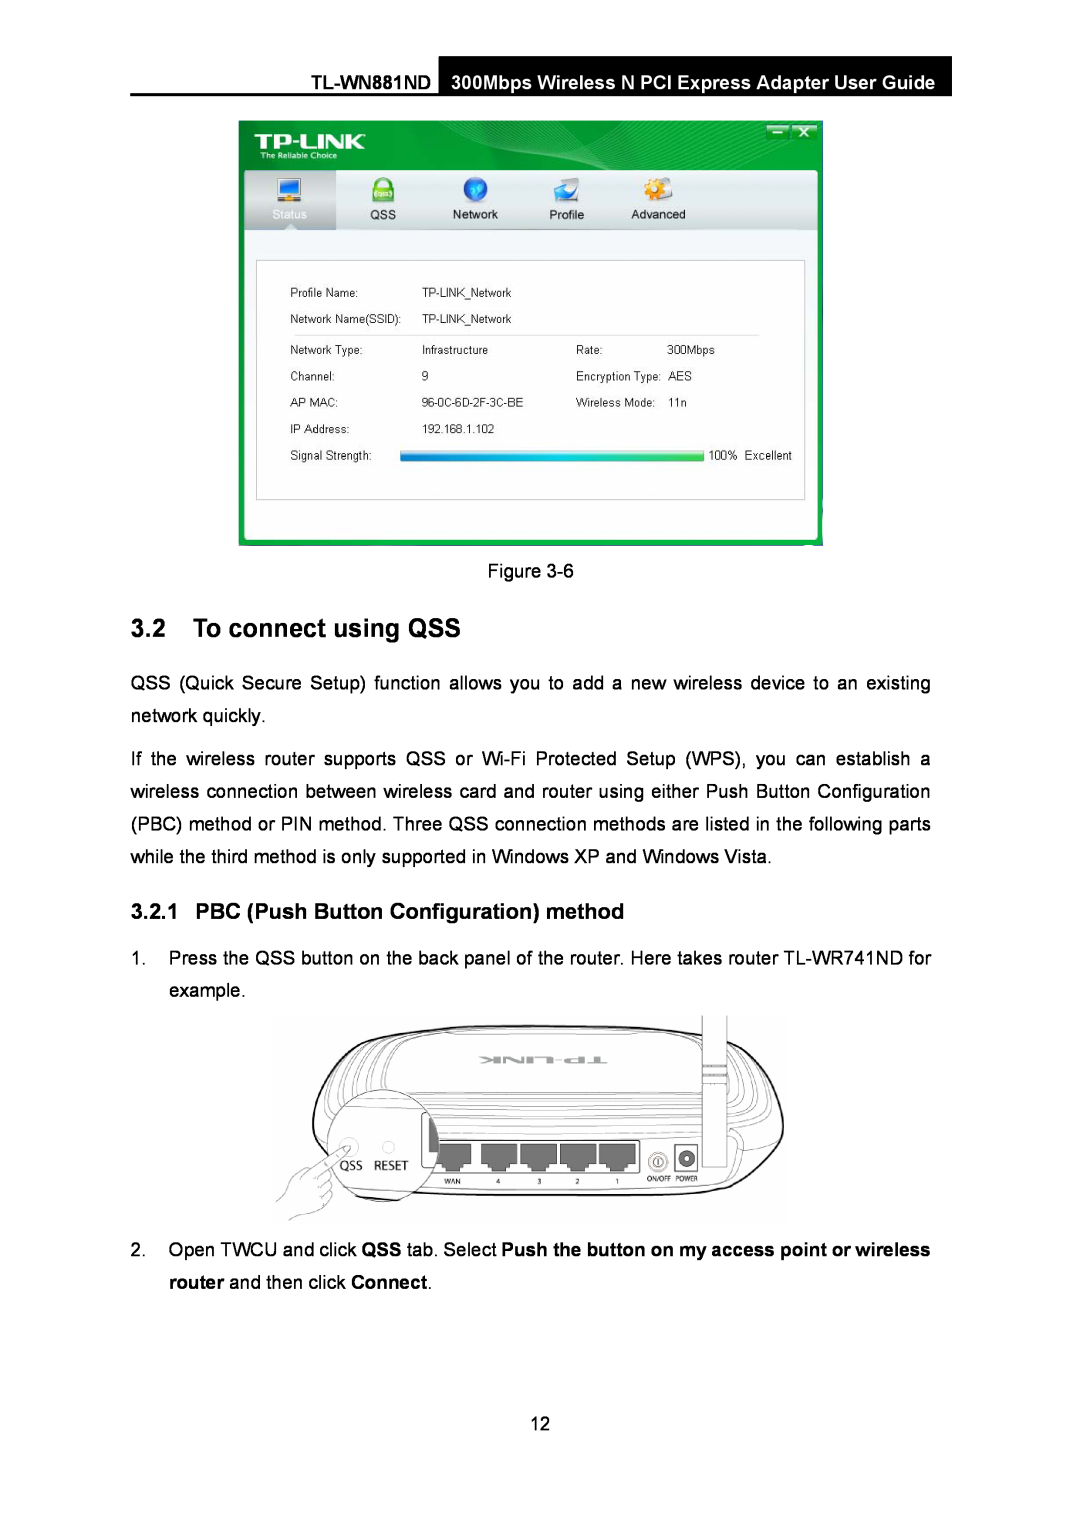 TP-Link TL-WN881ND manual To connect using QSS, PBC Push Button Configuration method 